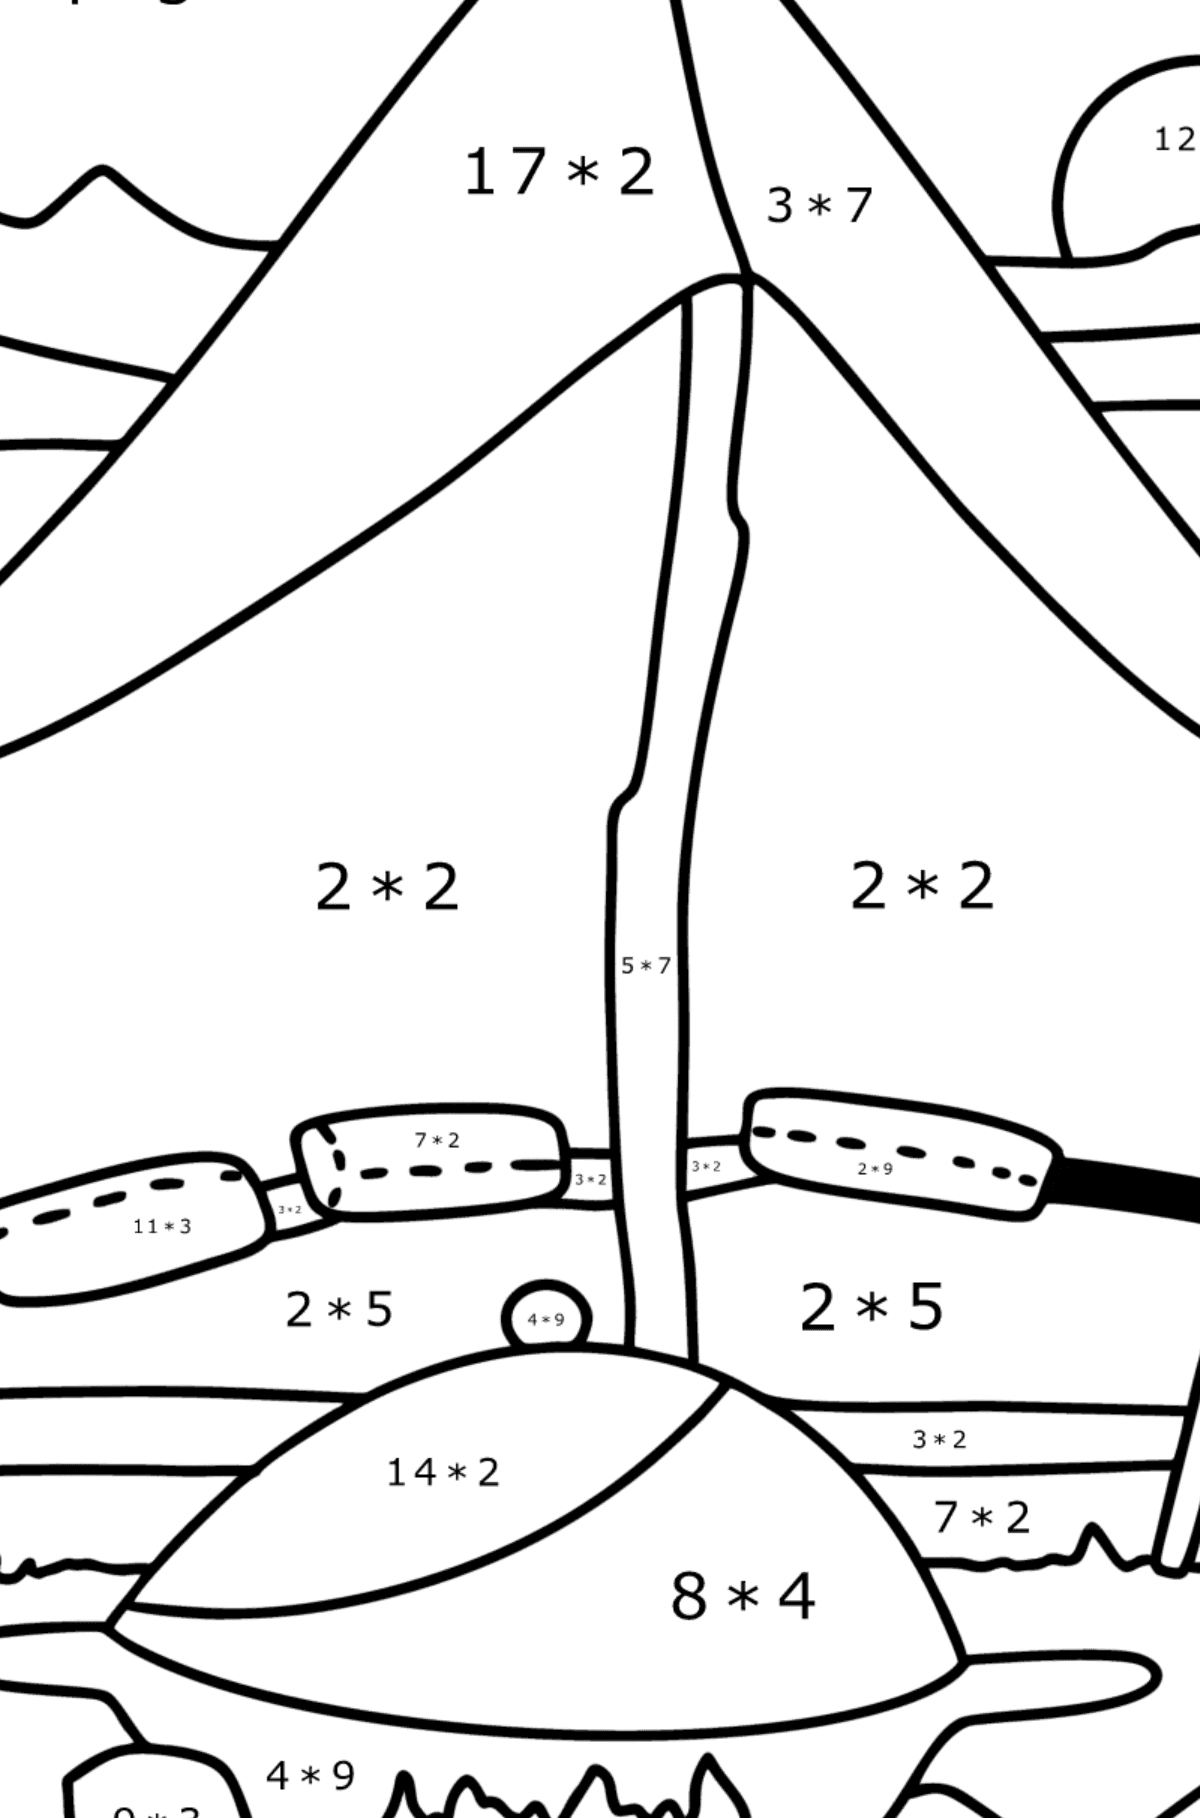 Bedouin tent coloring page - Math Coloring - Multiplication for Kids